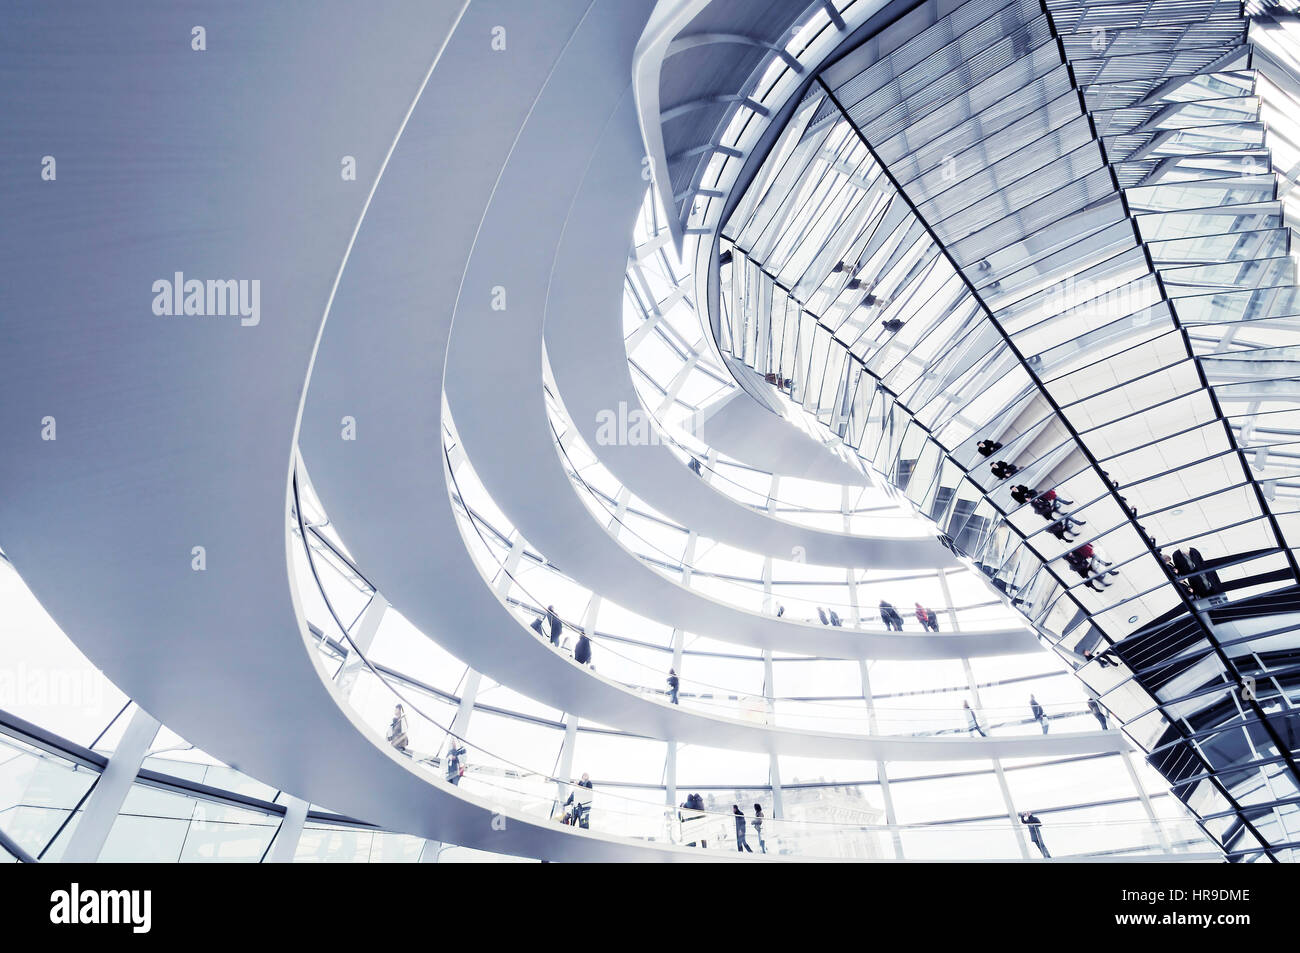 BERLIN, GERMANY - NOVEMBER 9 : View of Reichstag dome on NOVEMBER 9, 2009 in Berlin, Germany. The Reichstag dome is a glass dome constructed on top of Stock Photo